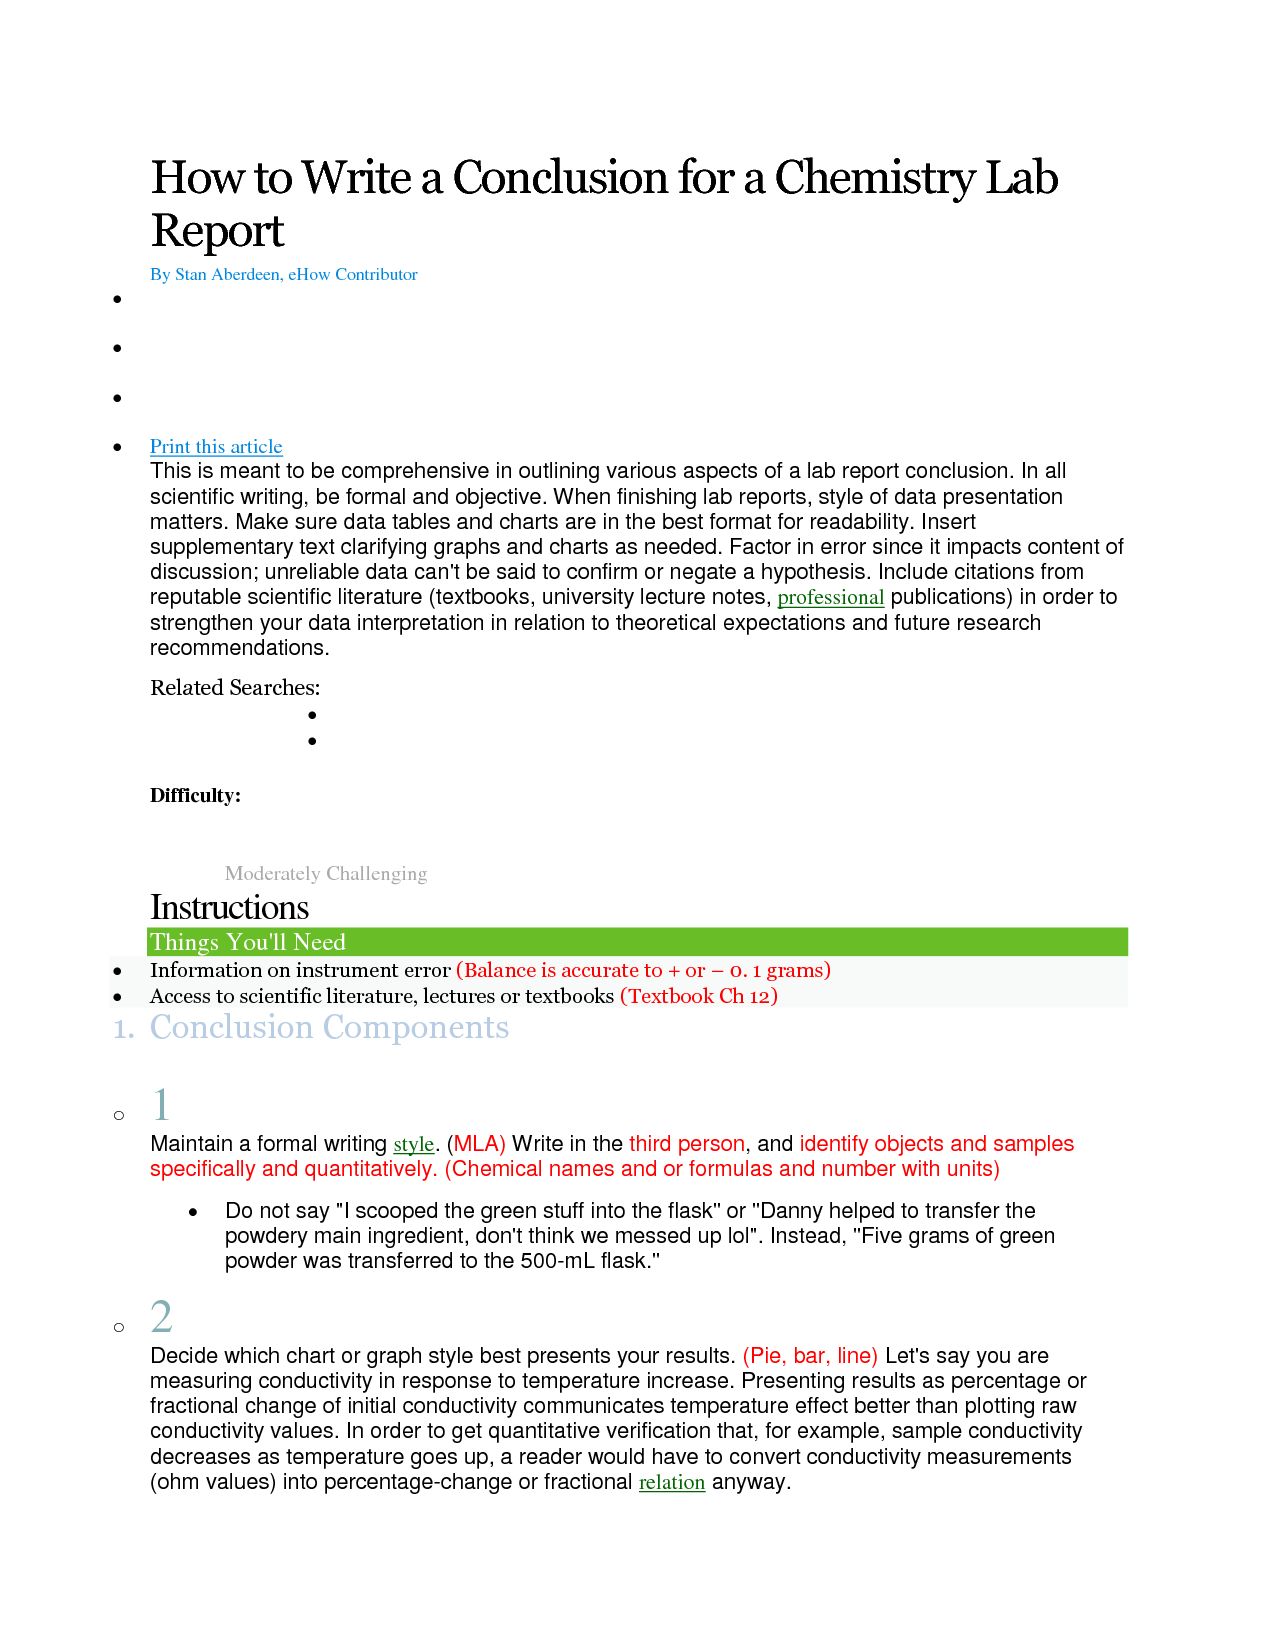 how to write a laboratory report in chemistry